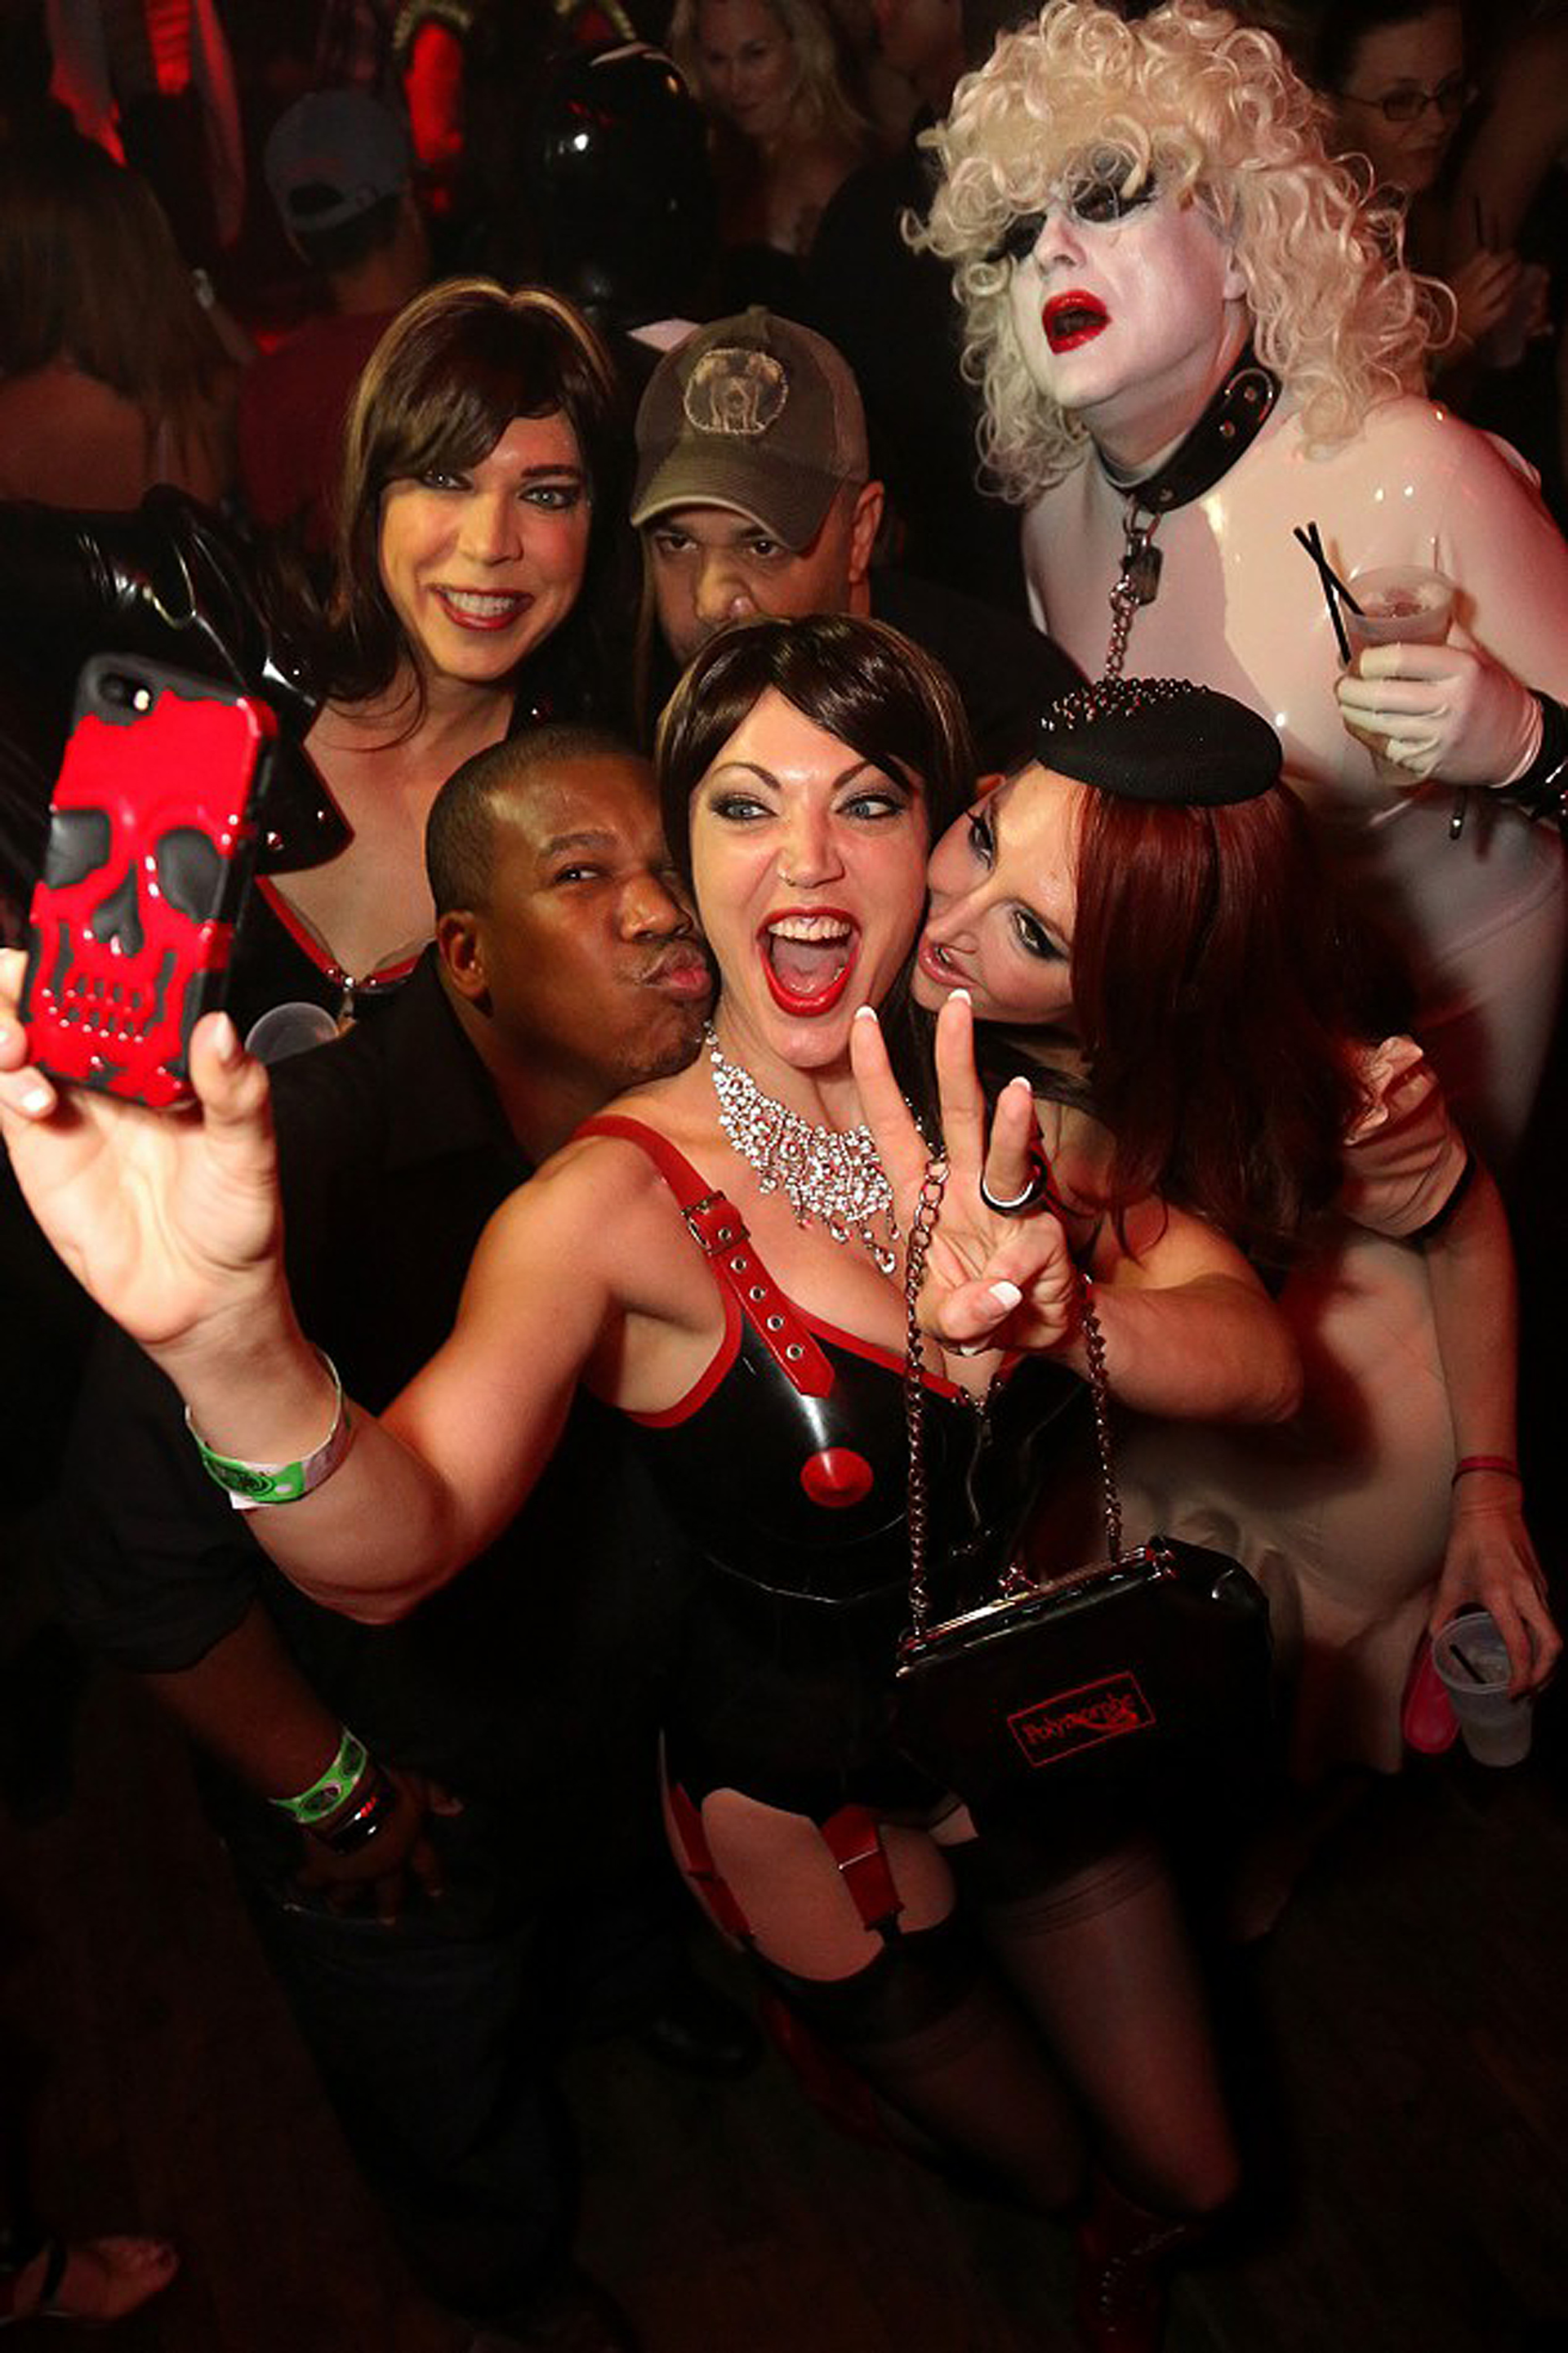 Got fetish? FetCon comes to St pic